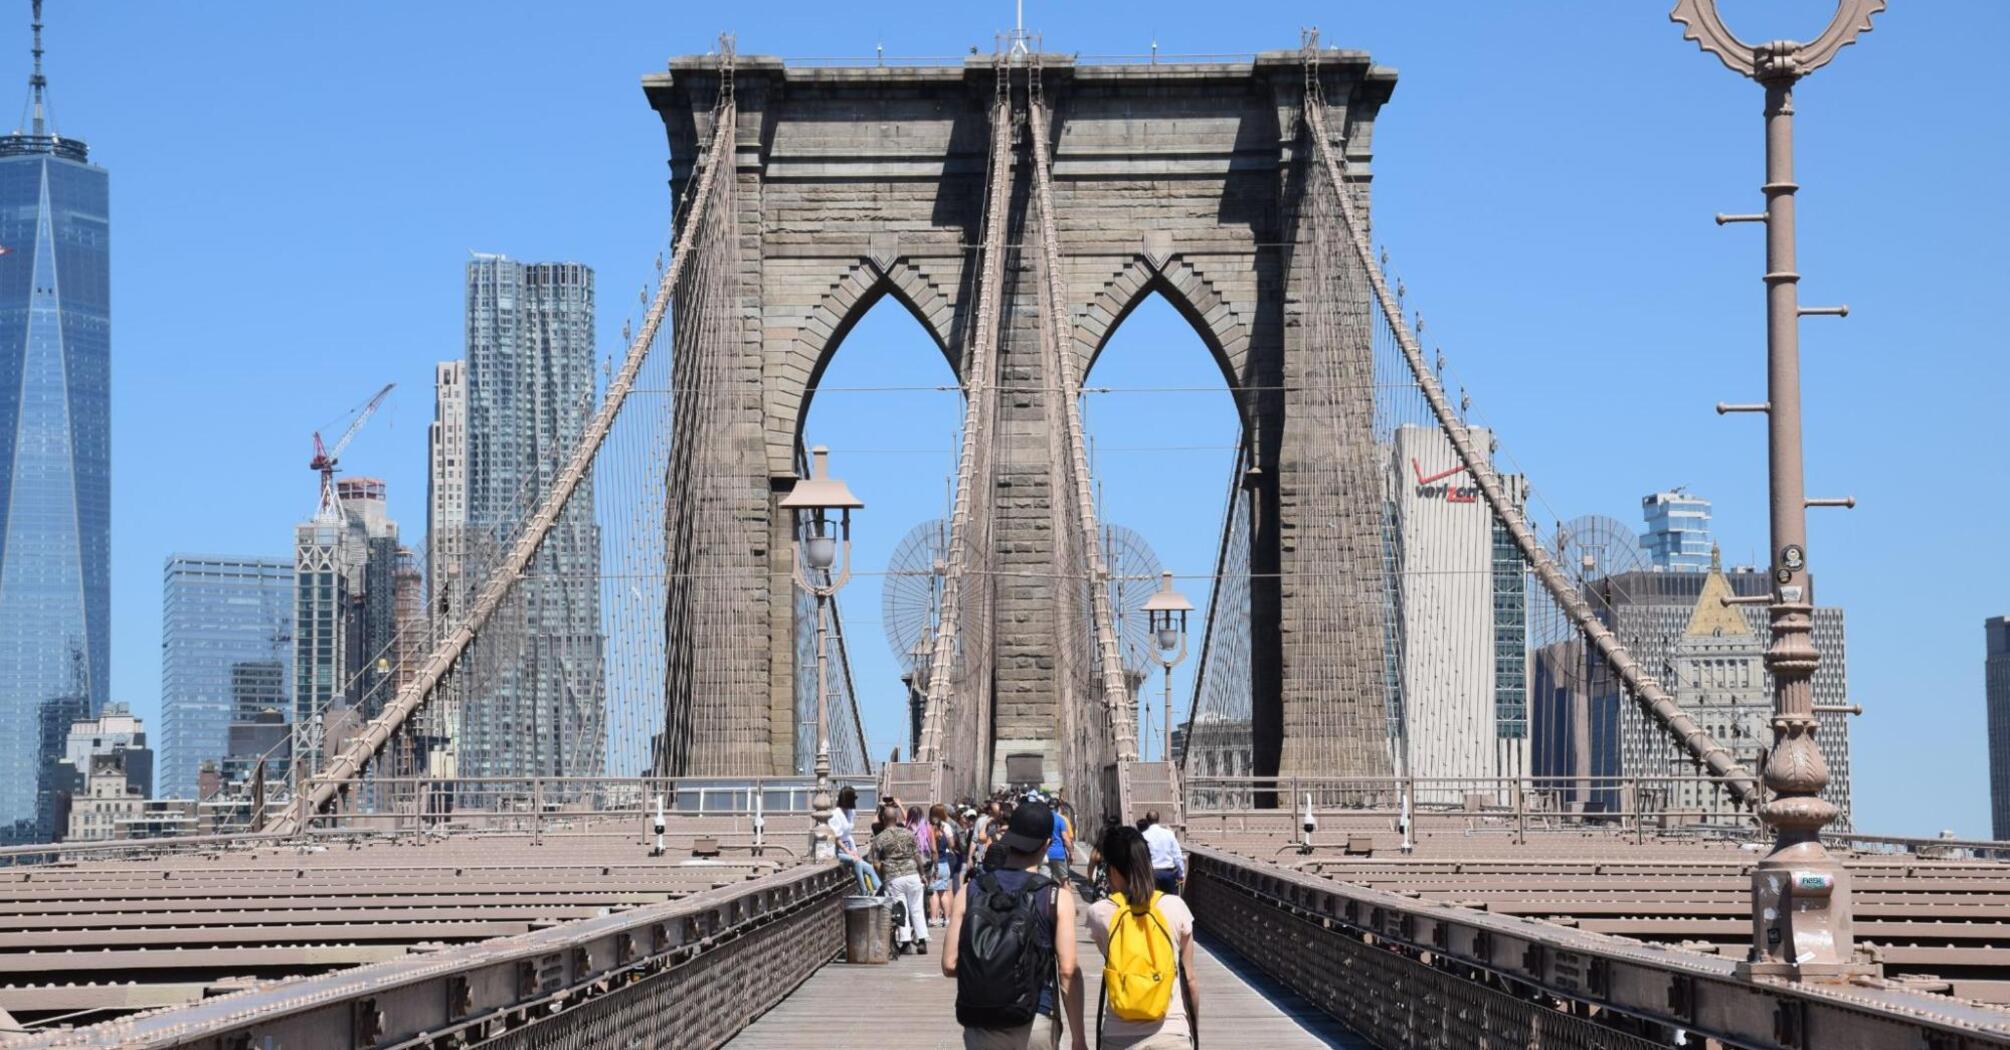 The famous Brooklyn Bridge against the backdrop of city architecture